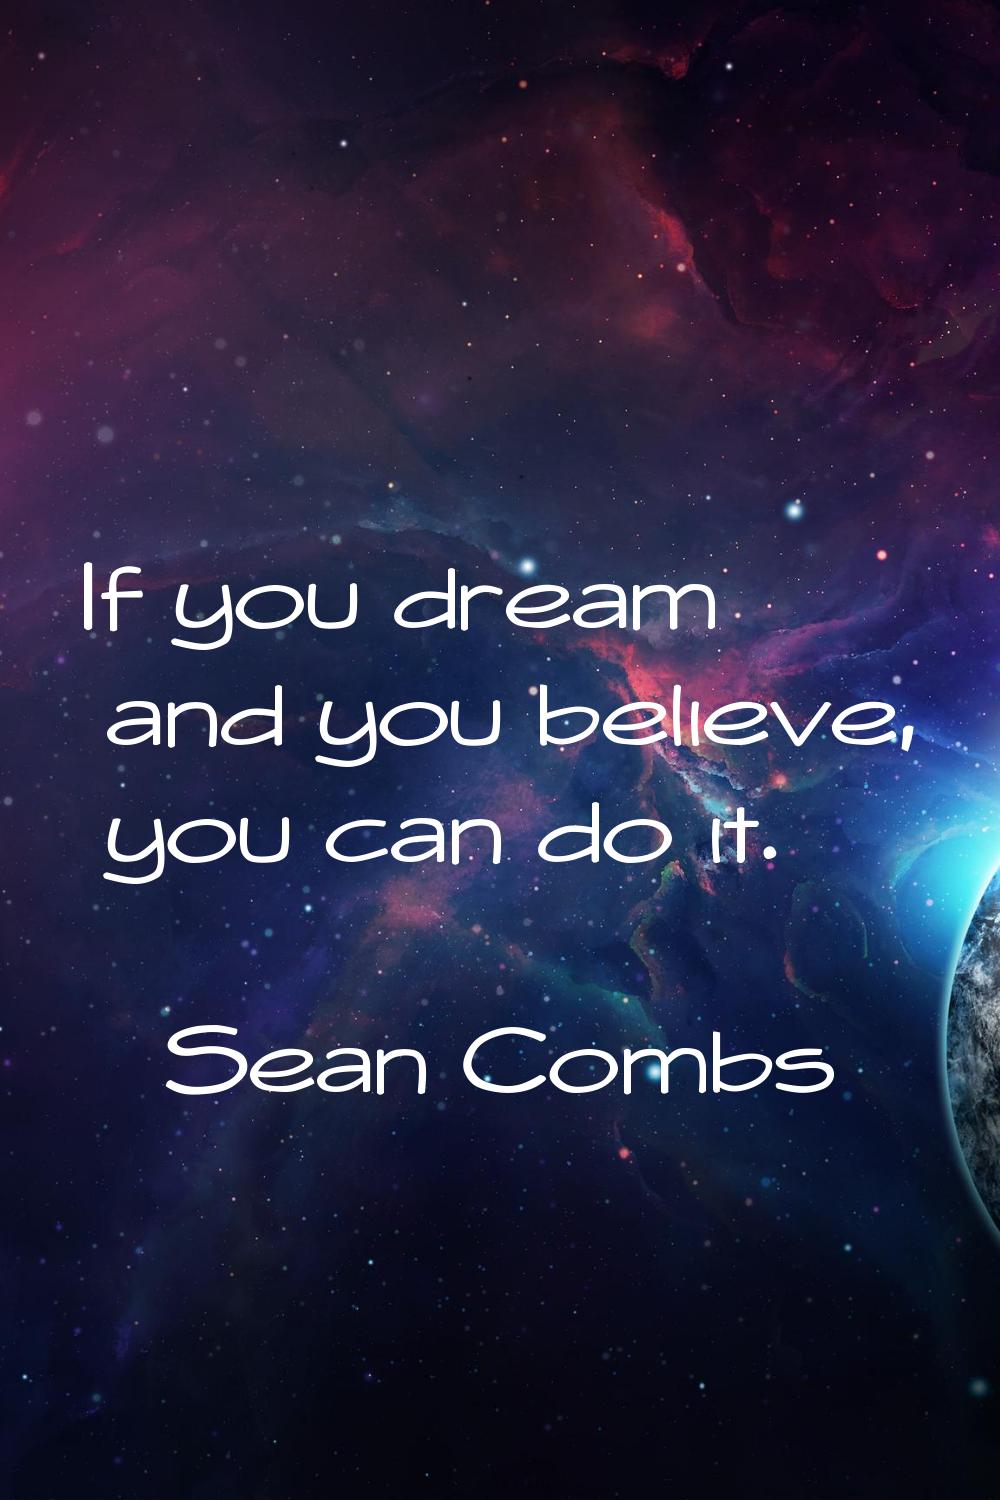 If you dream and you believe, you can do it.